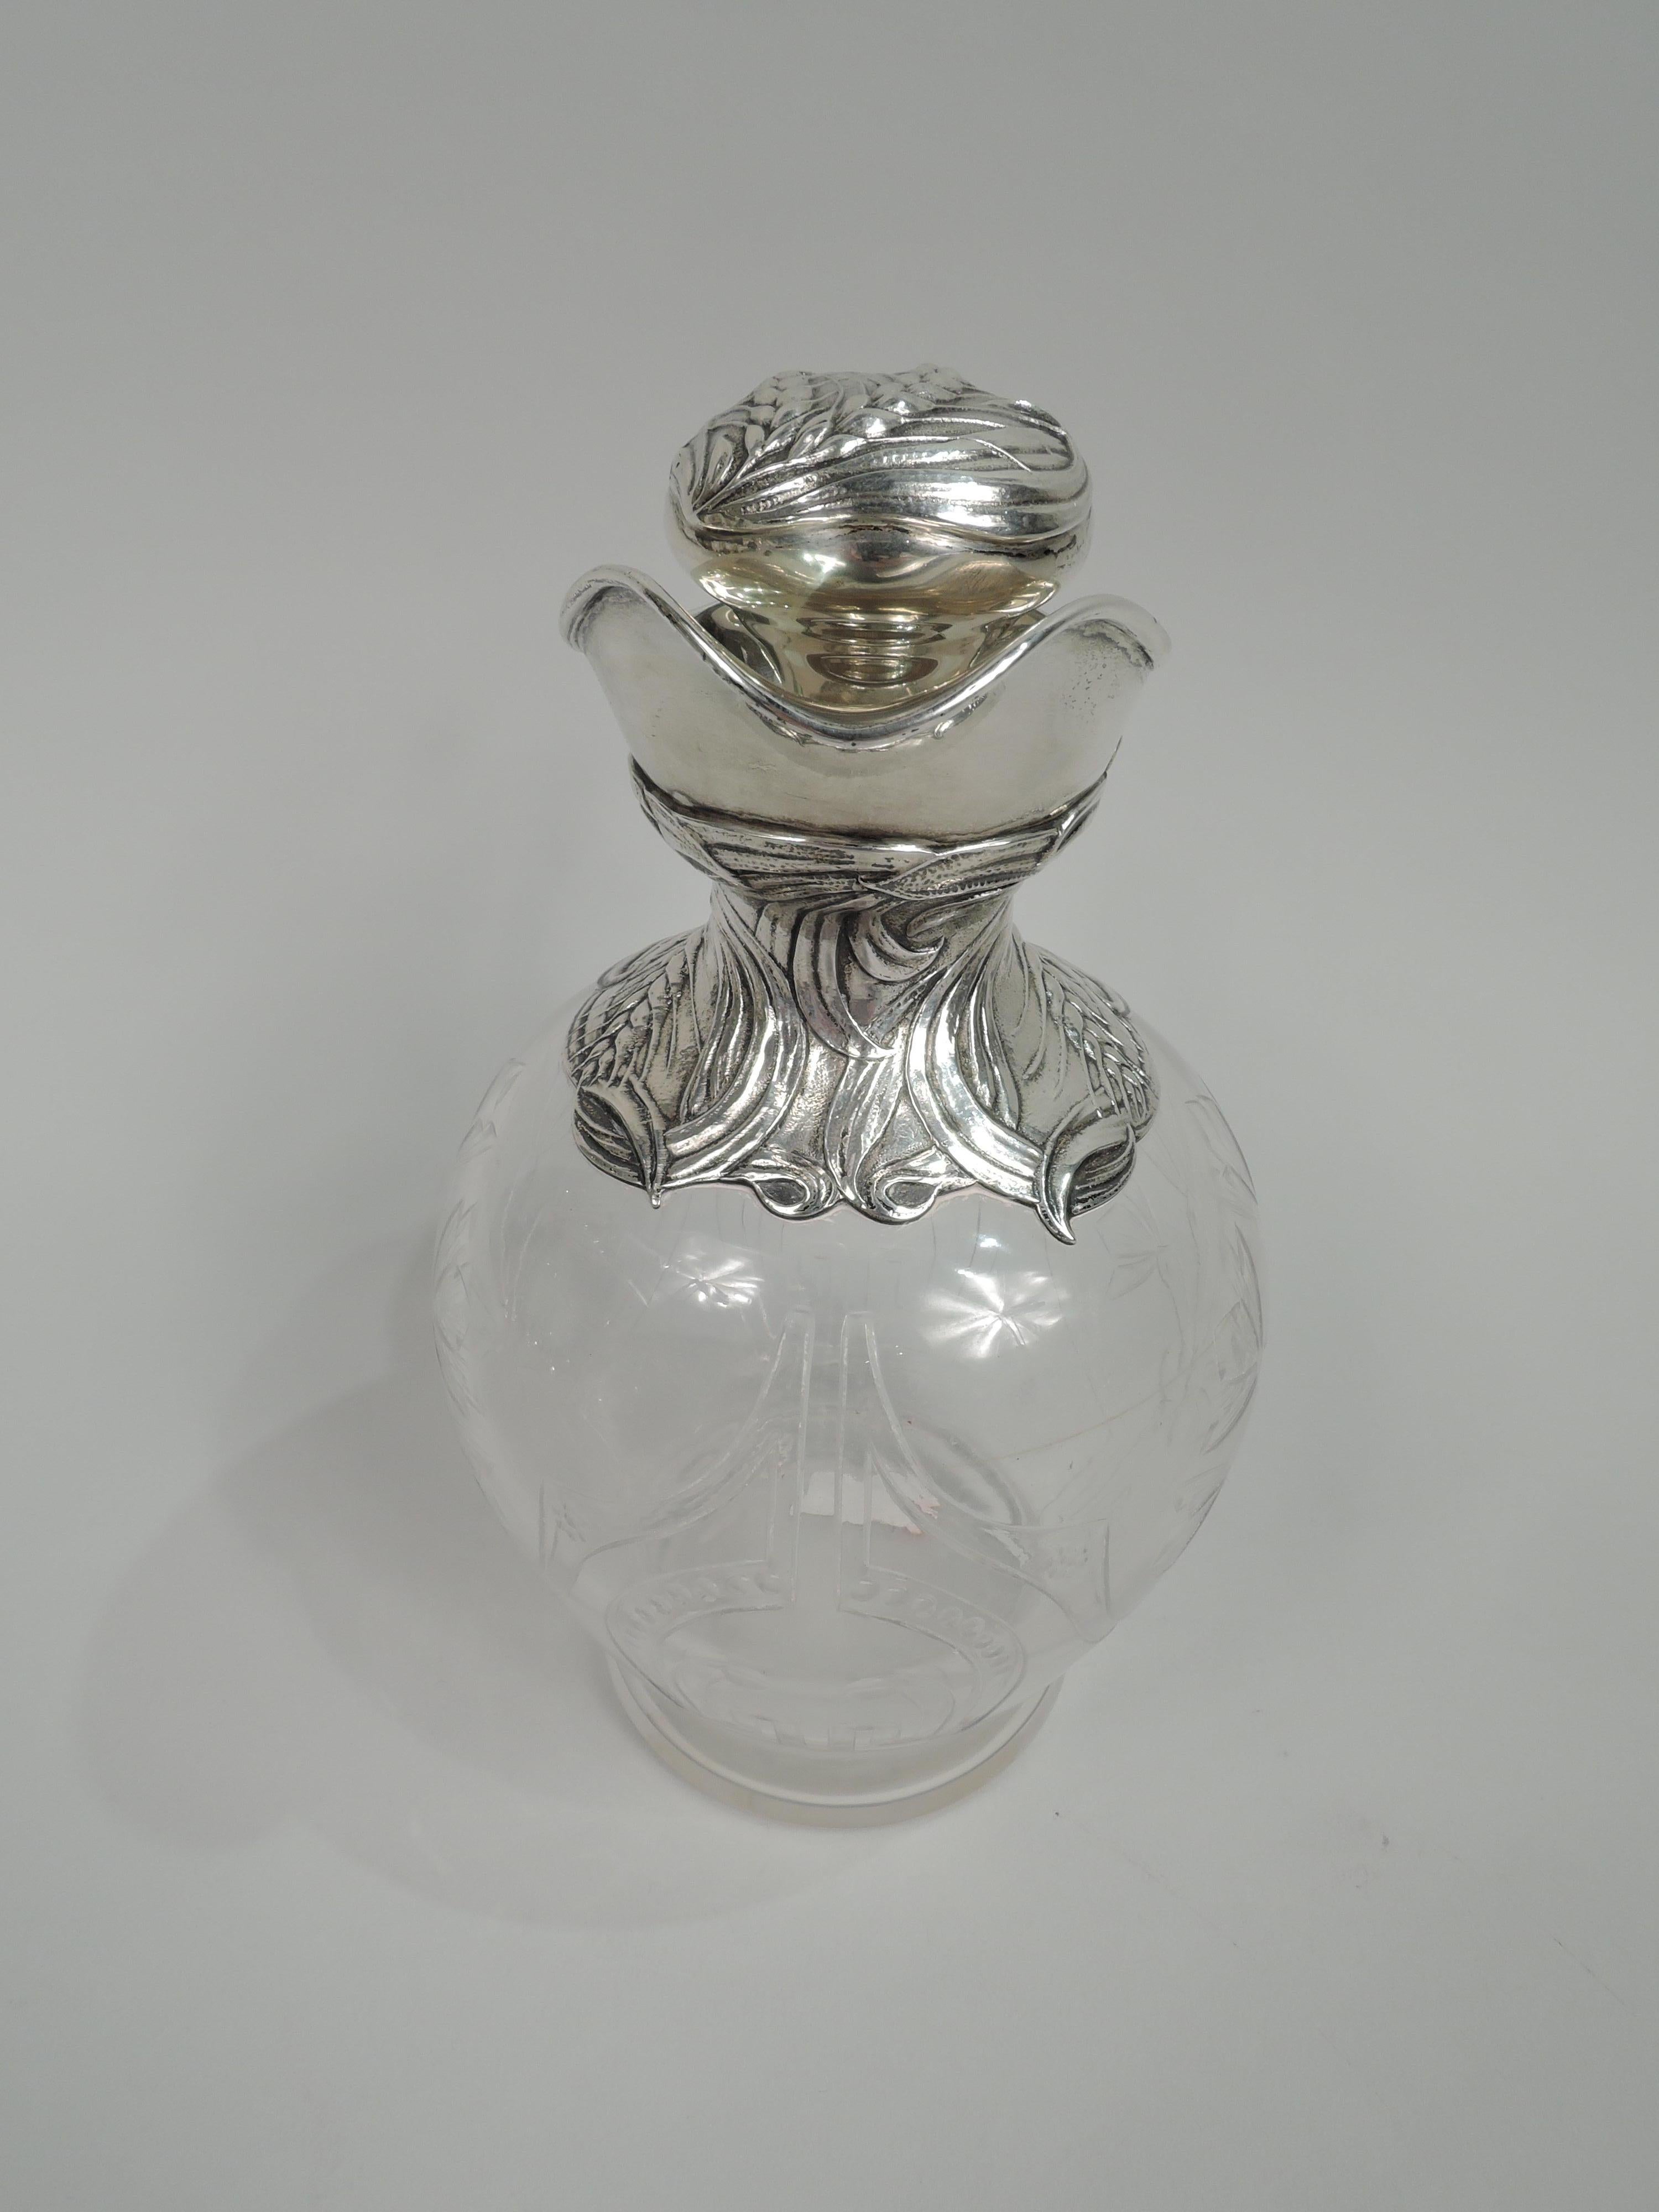 Turn-of-the-century Art Nouveau sterling silver and crystal decanter. Made by Gorham in Providence. Ovoid crystal bowl with cut and engraved ornament: Beaded horse shoe in curvilinear strapwork frame, and stylized thistles. Sterling silver helmet